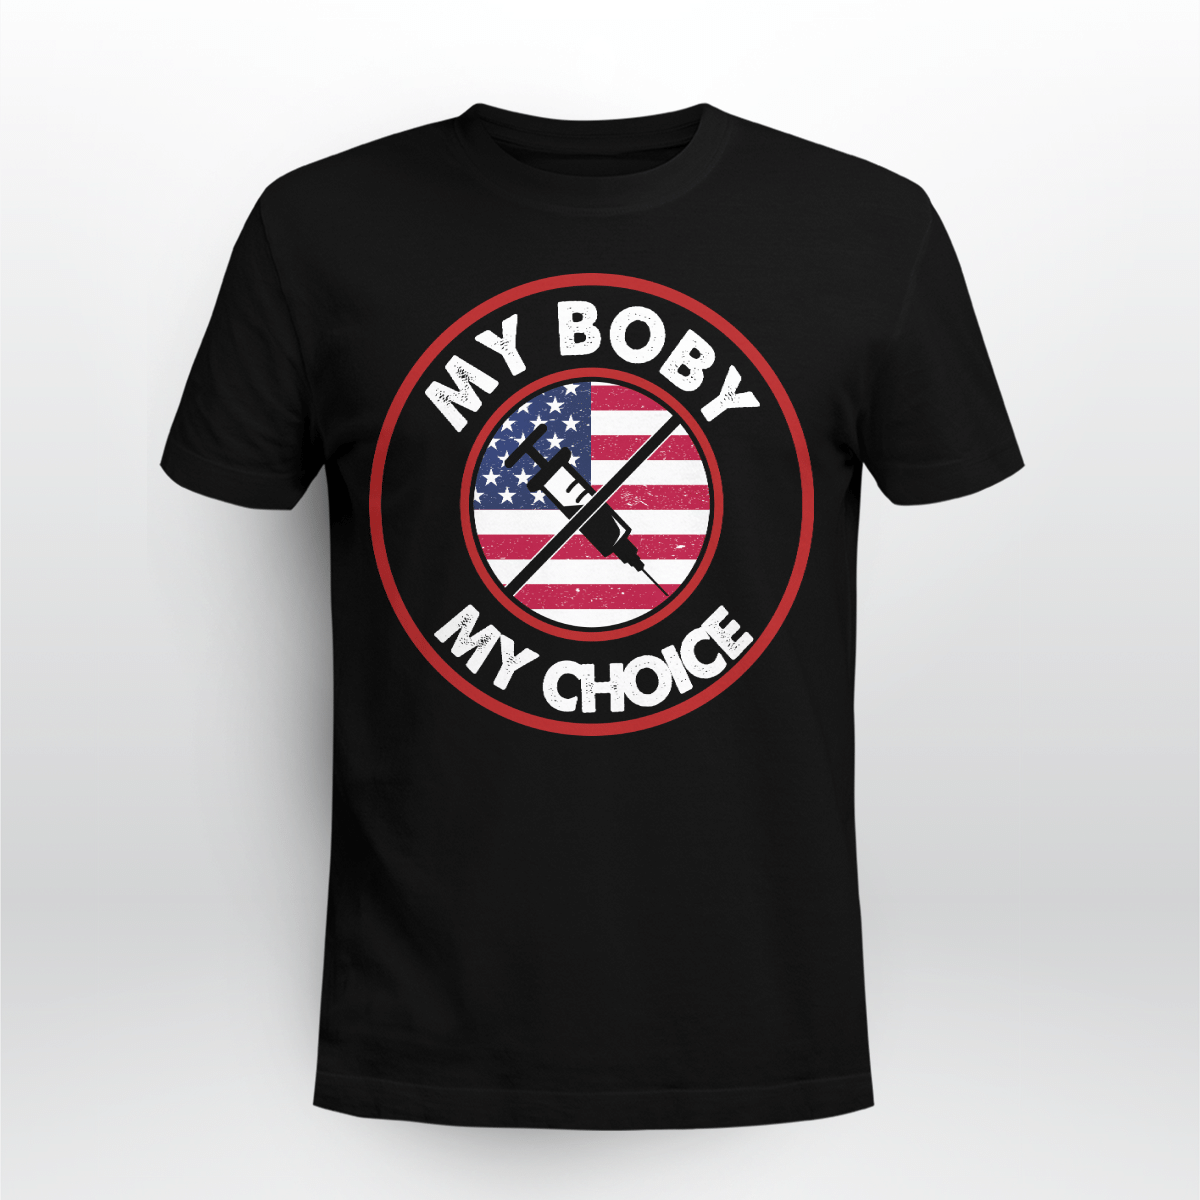 My Body My Choice Anti-Vaccination No Forced Vaccines Shirt Style: Unisex T-shirt, Color: Black